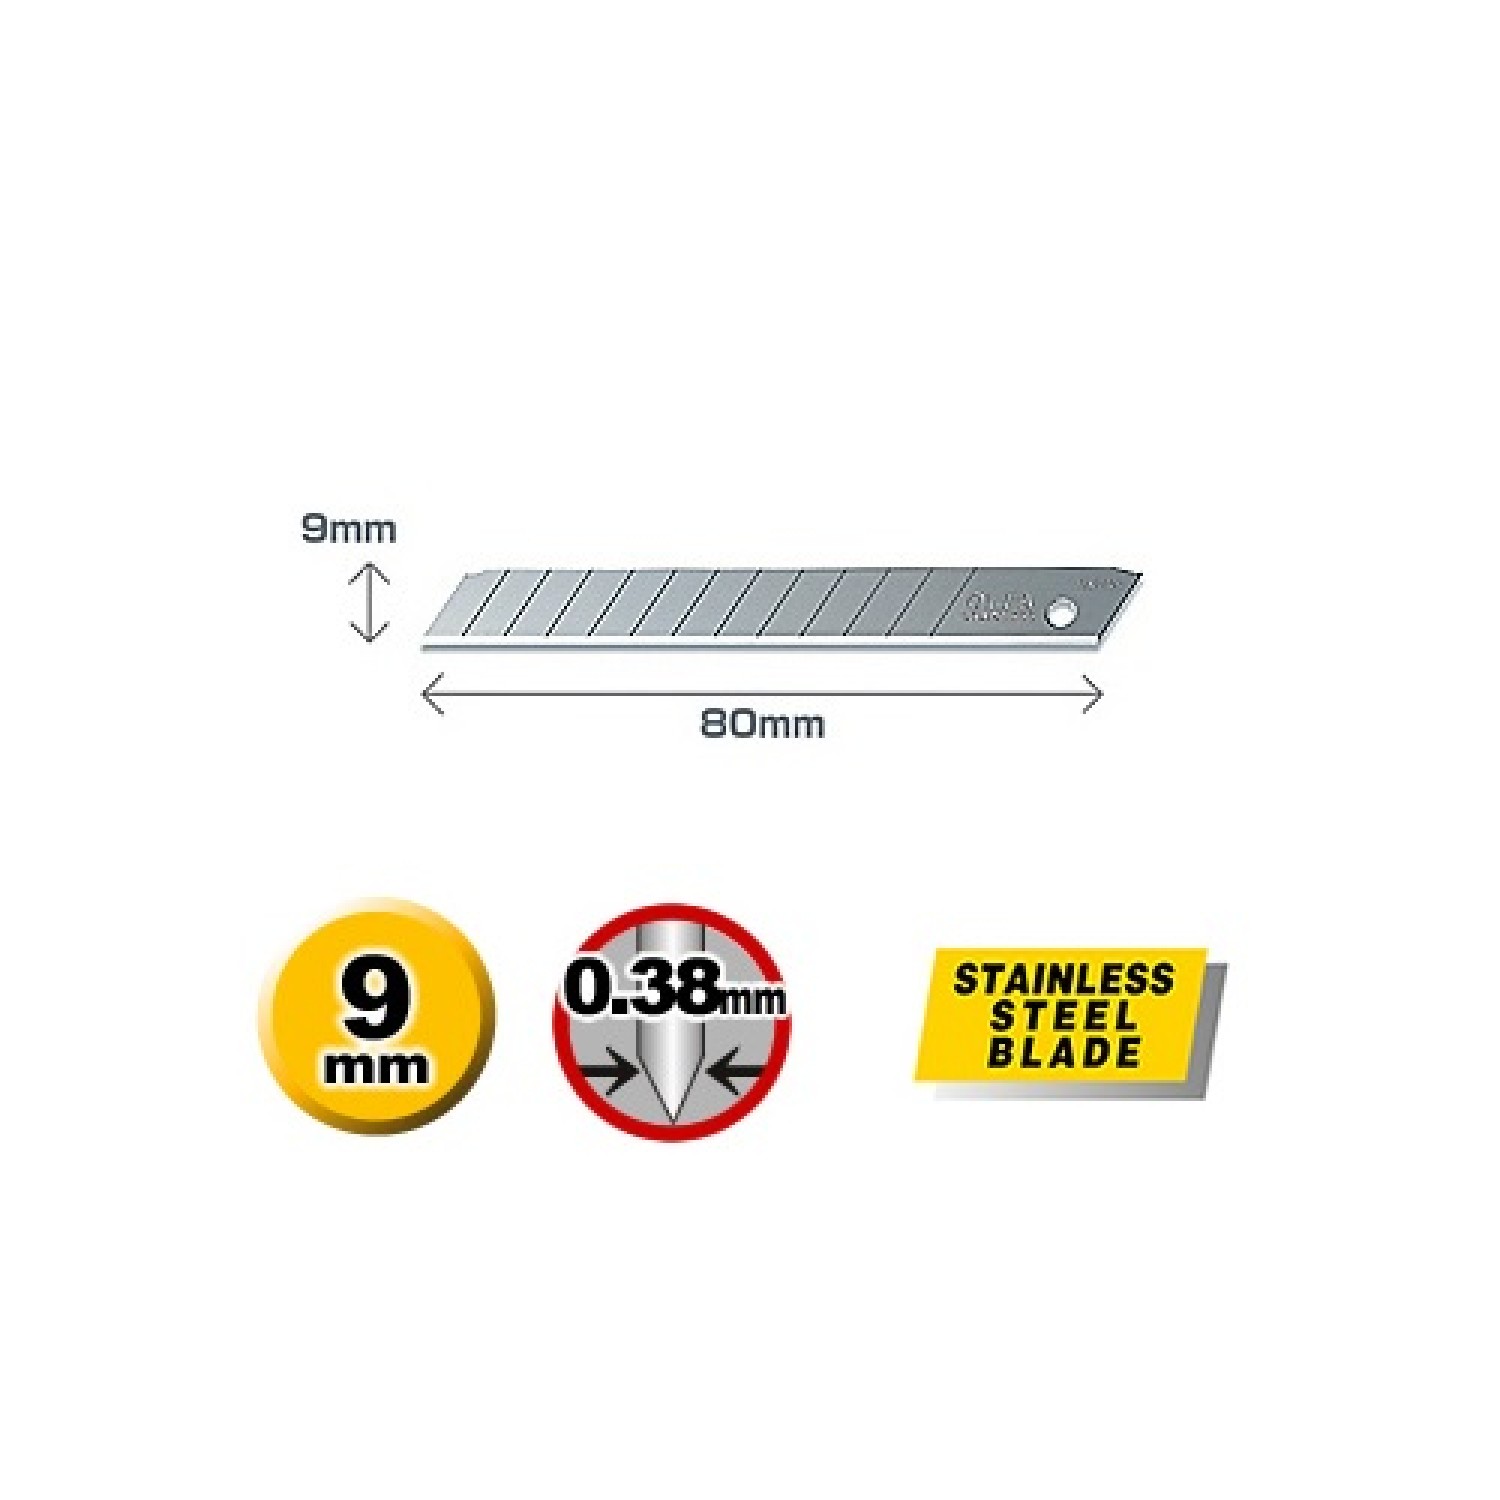 Olfa AB-10S Stainless Steel Blade Dimentions